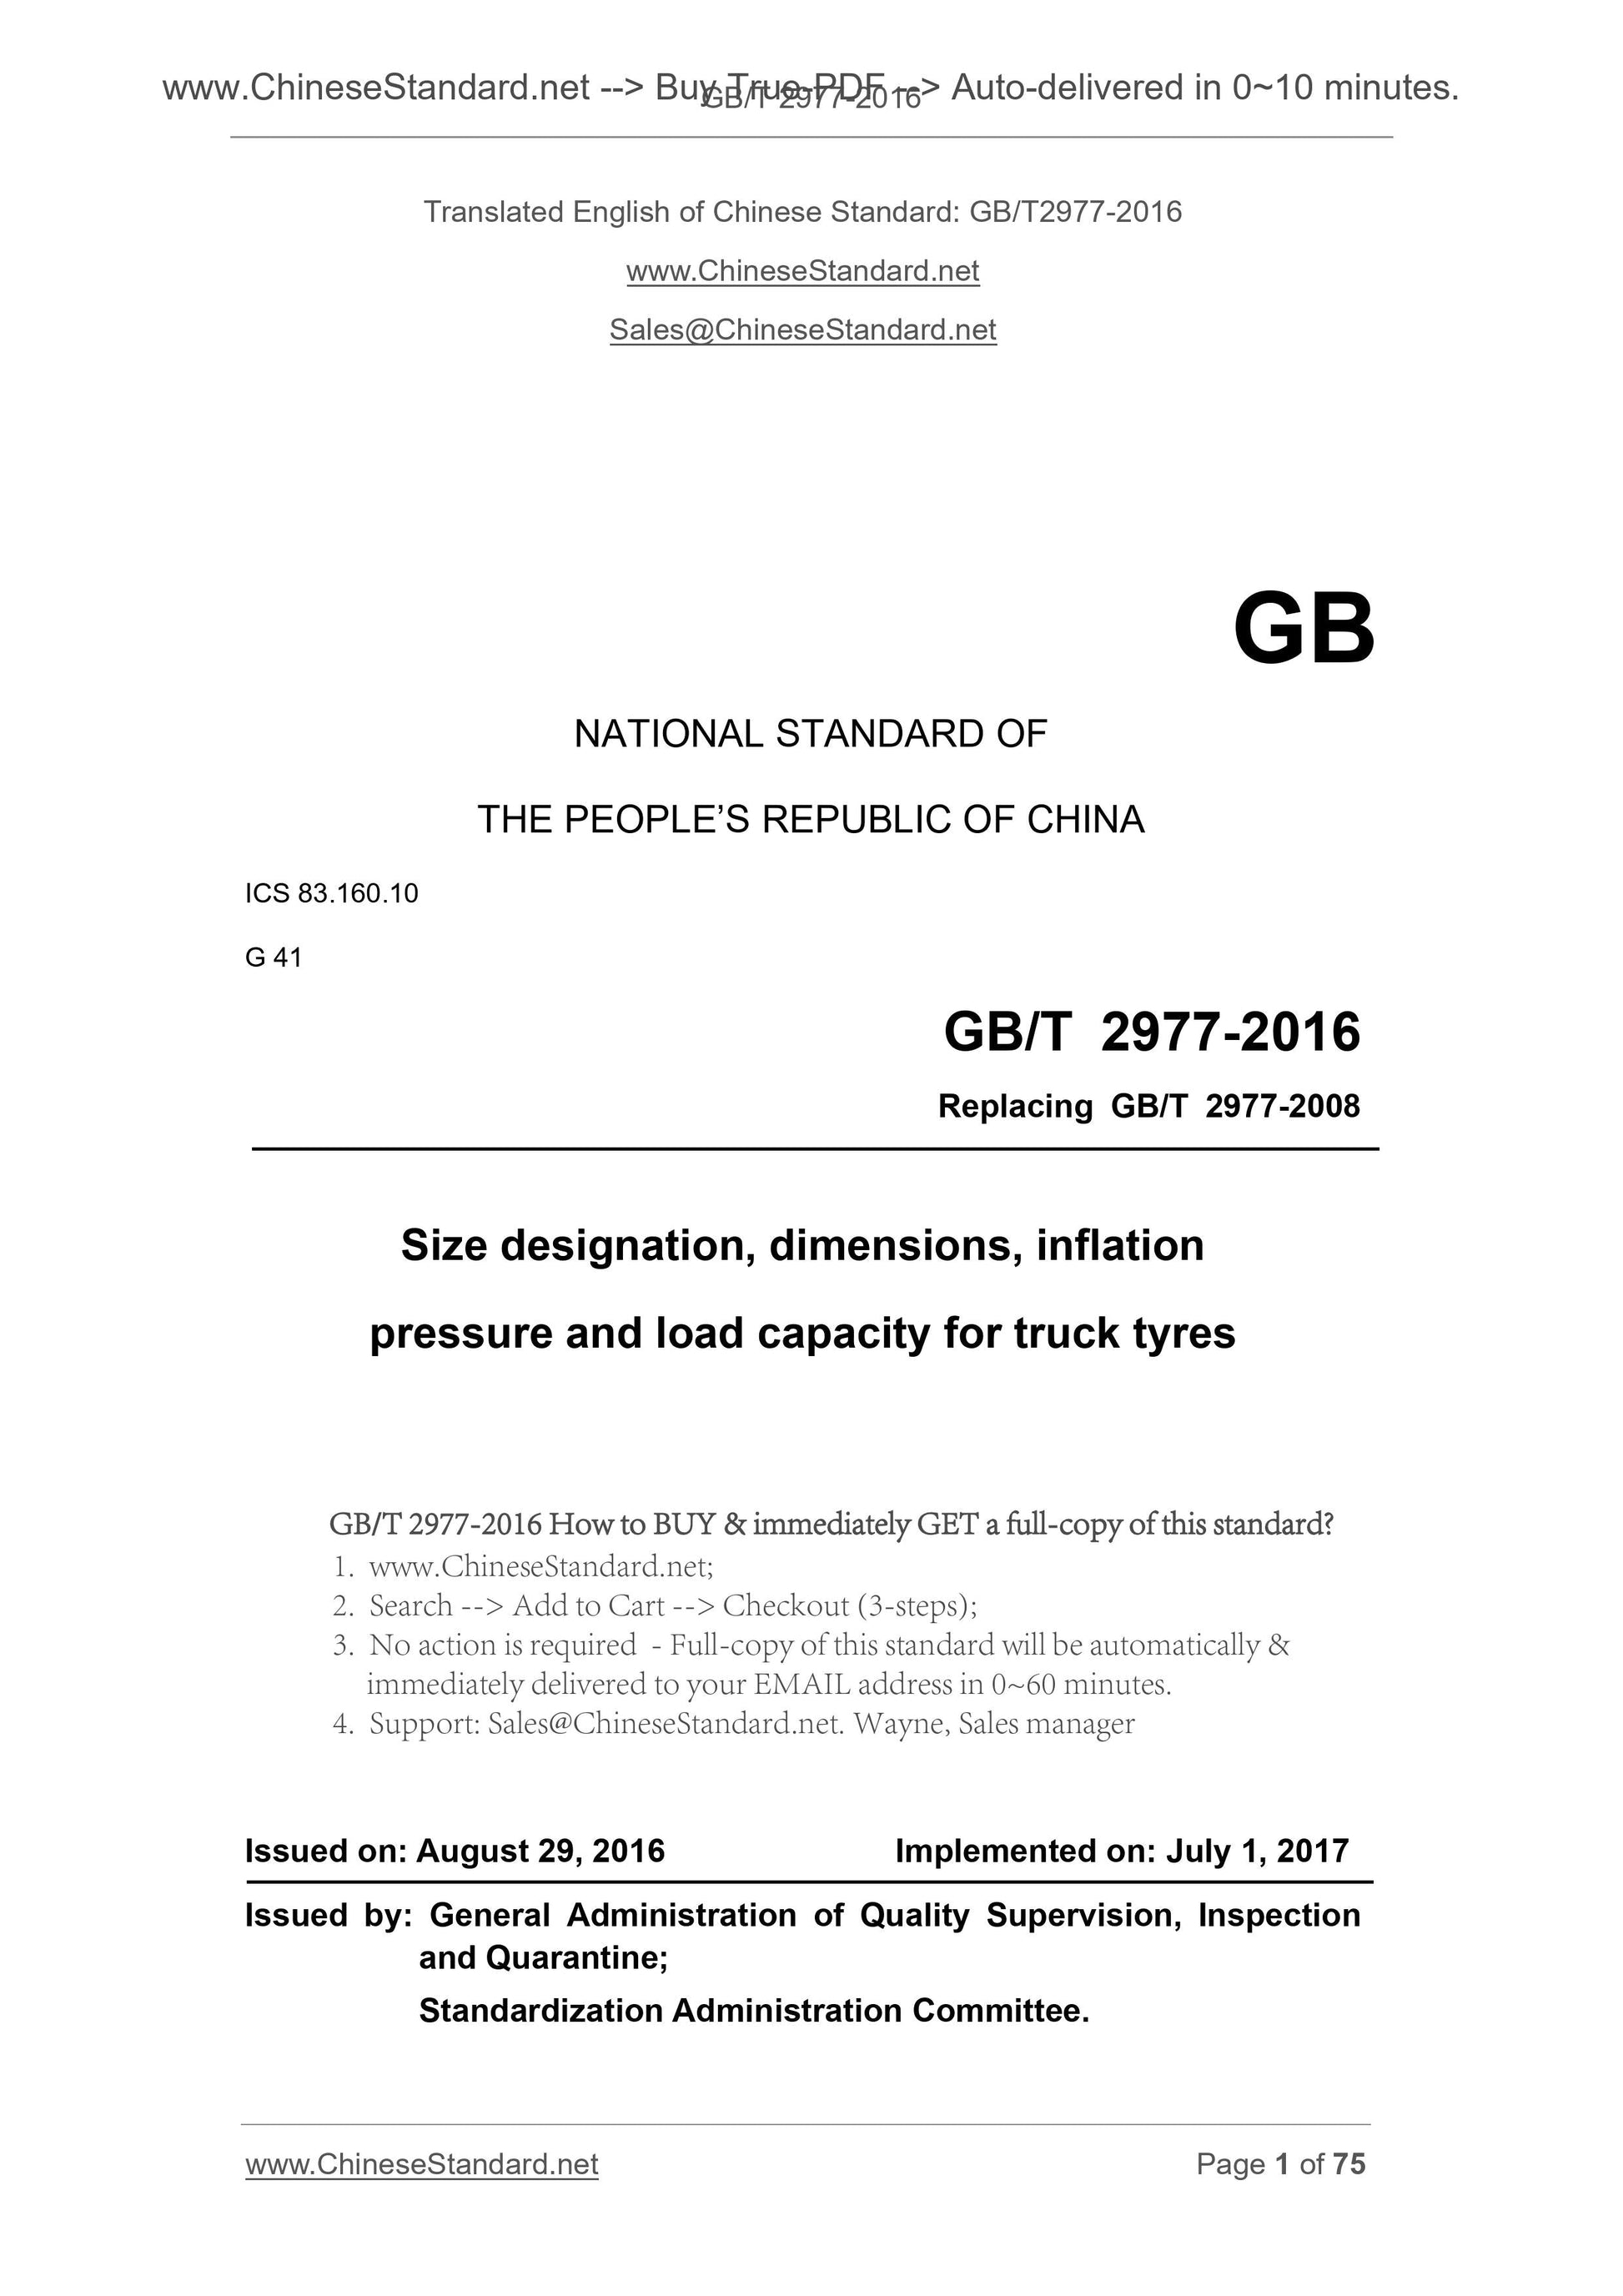 GB/T 2977-2016 Page 1